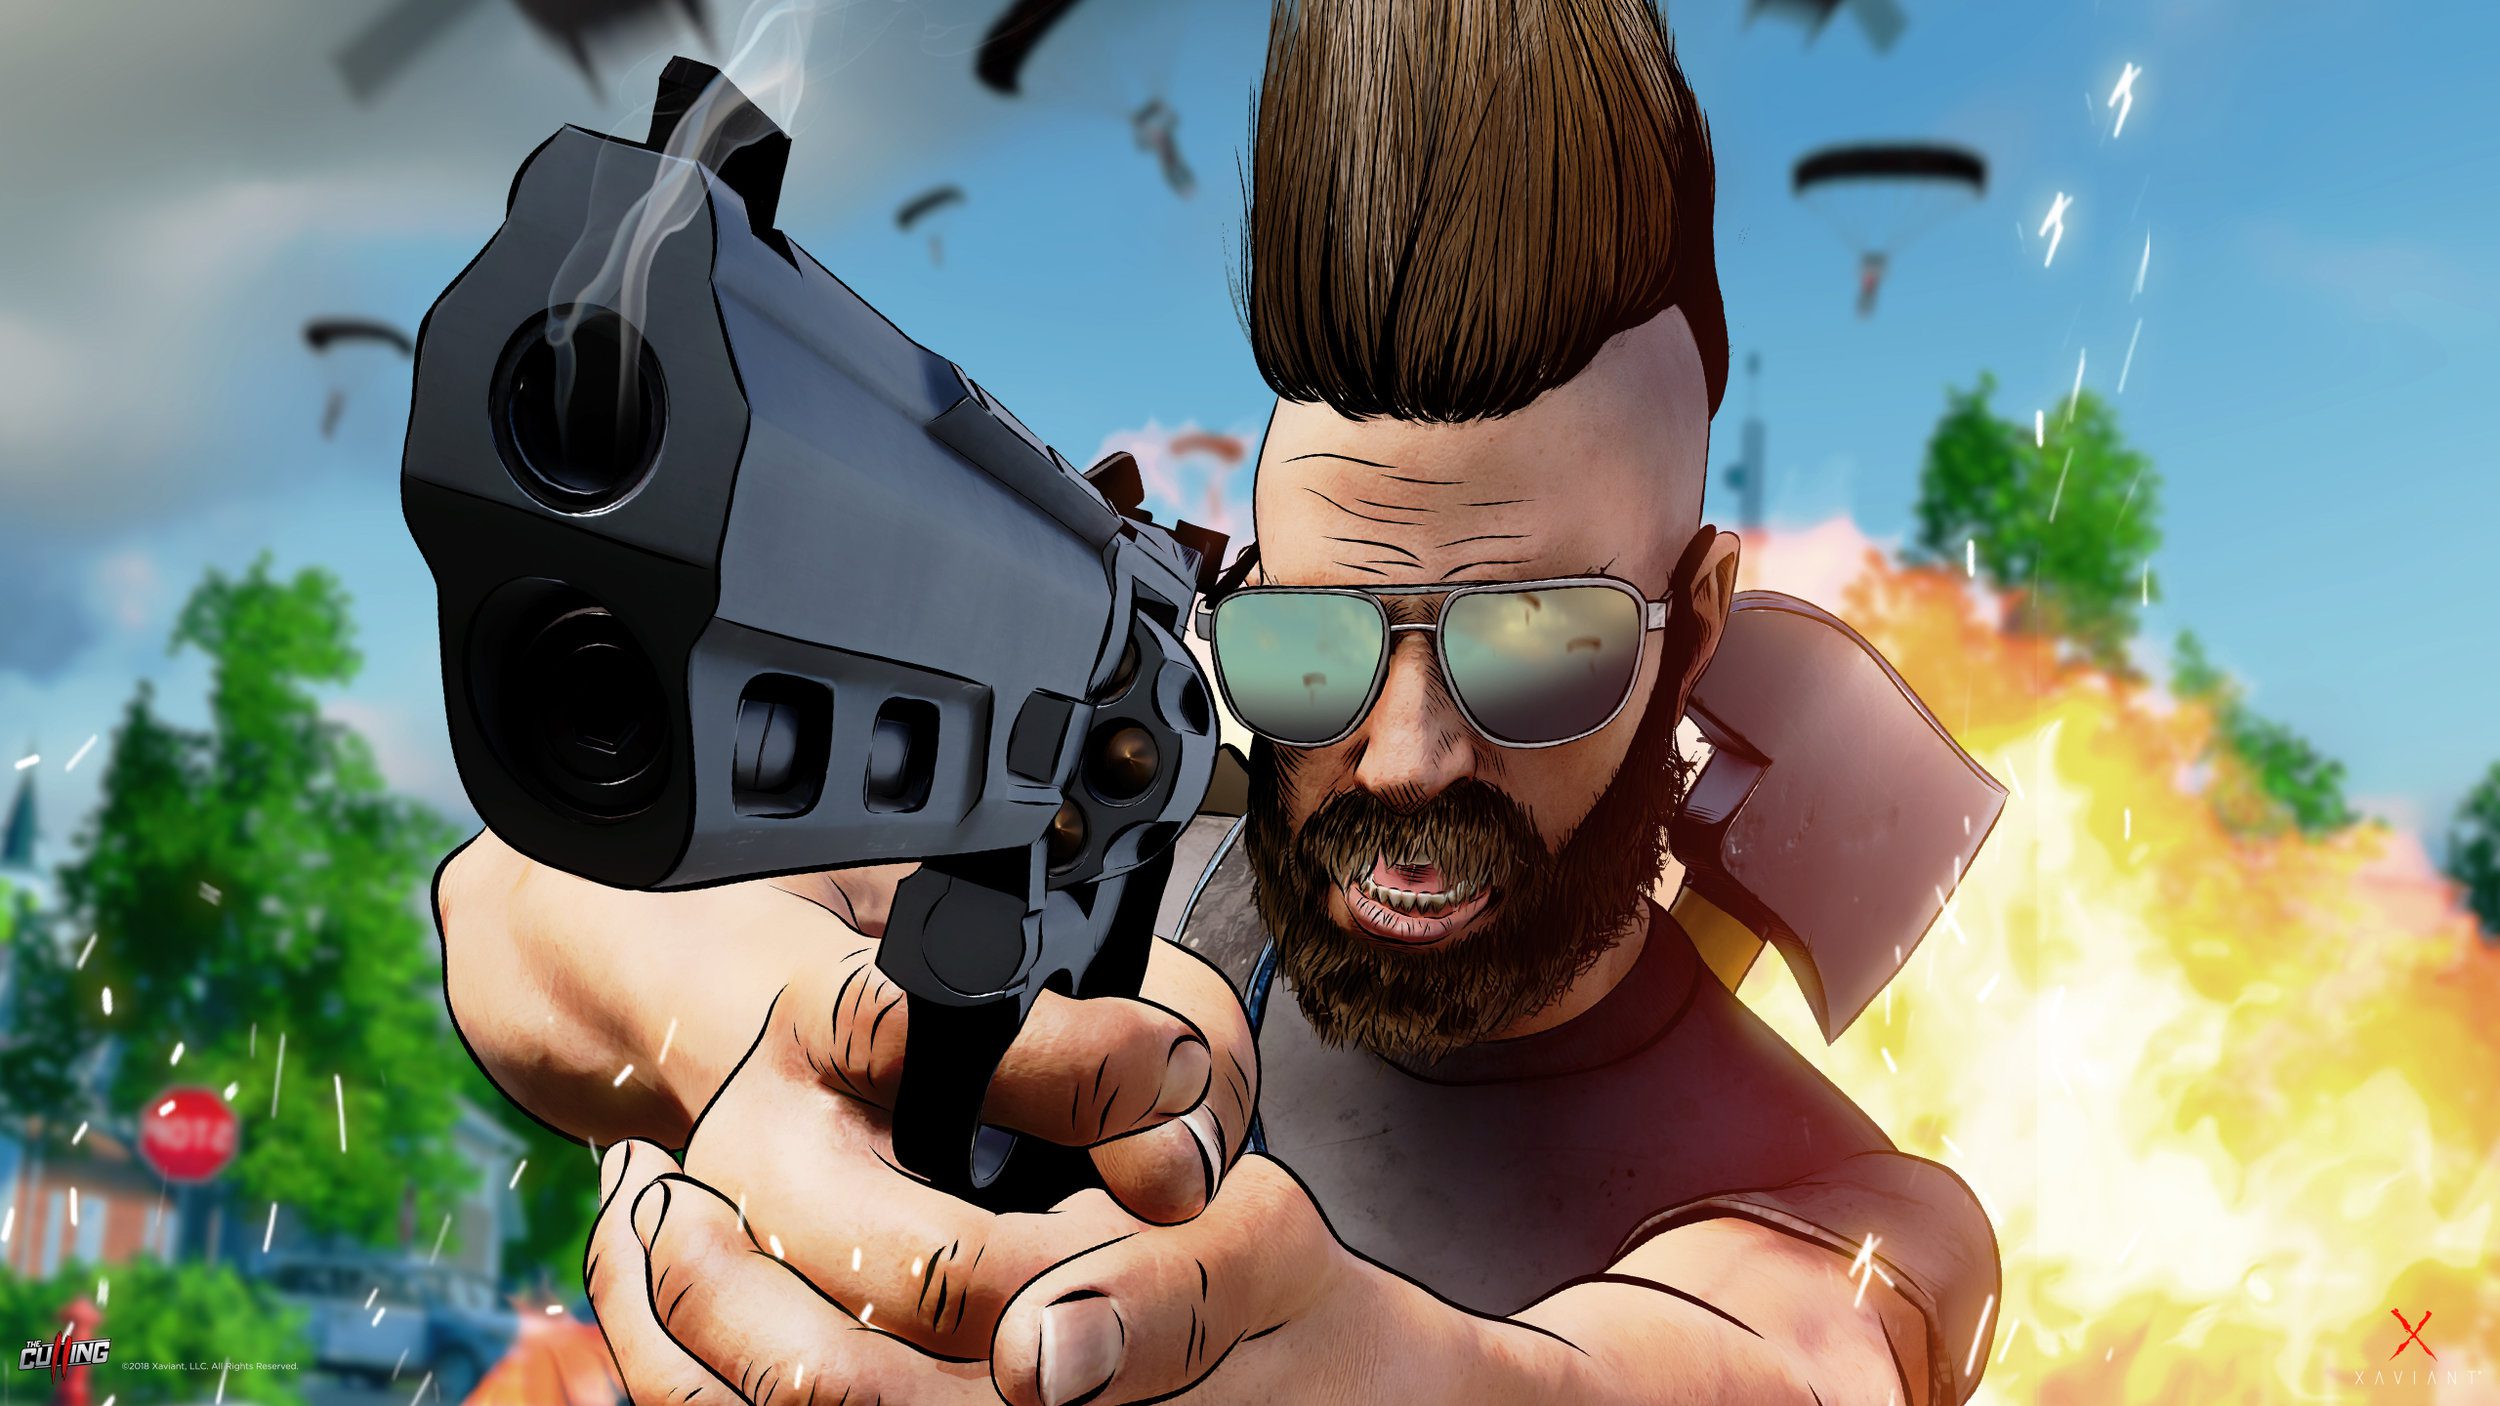 The Culling II is so bad the studio pulls game from Steam after 2 days